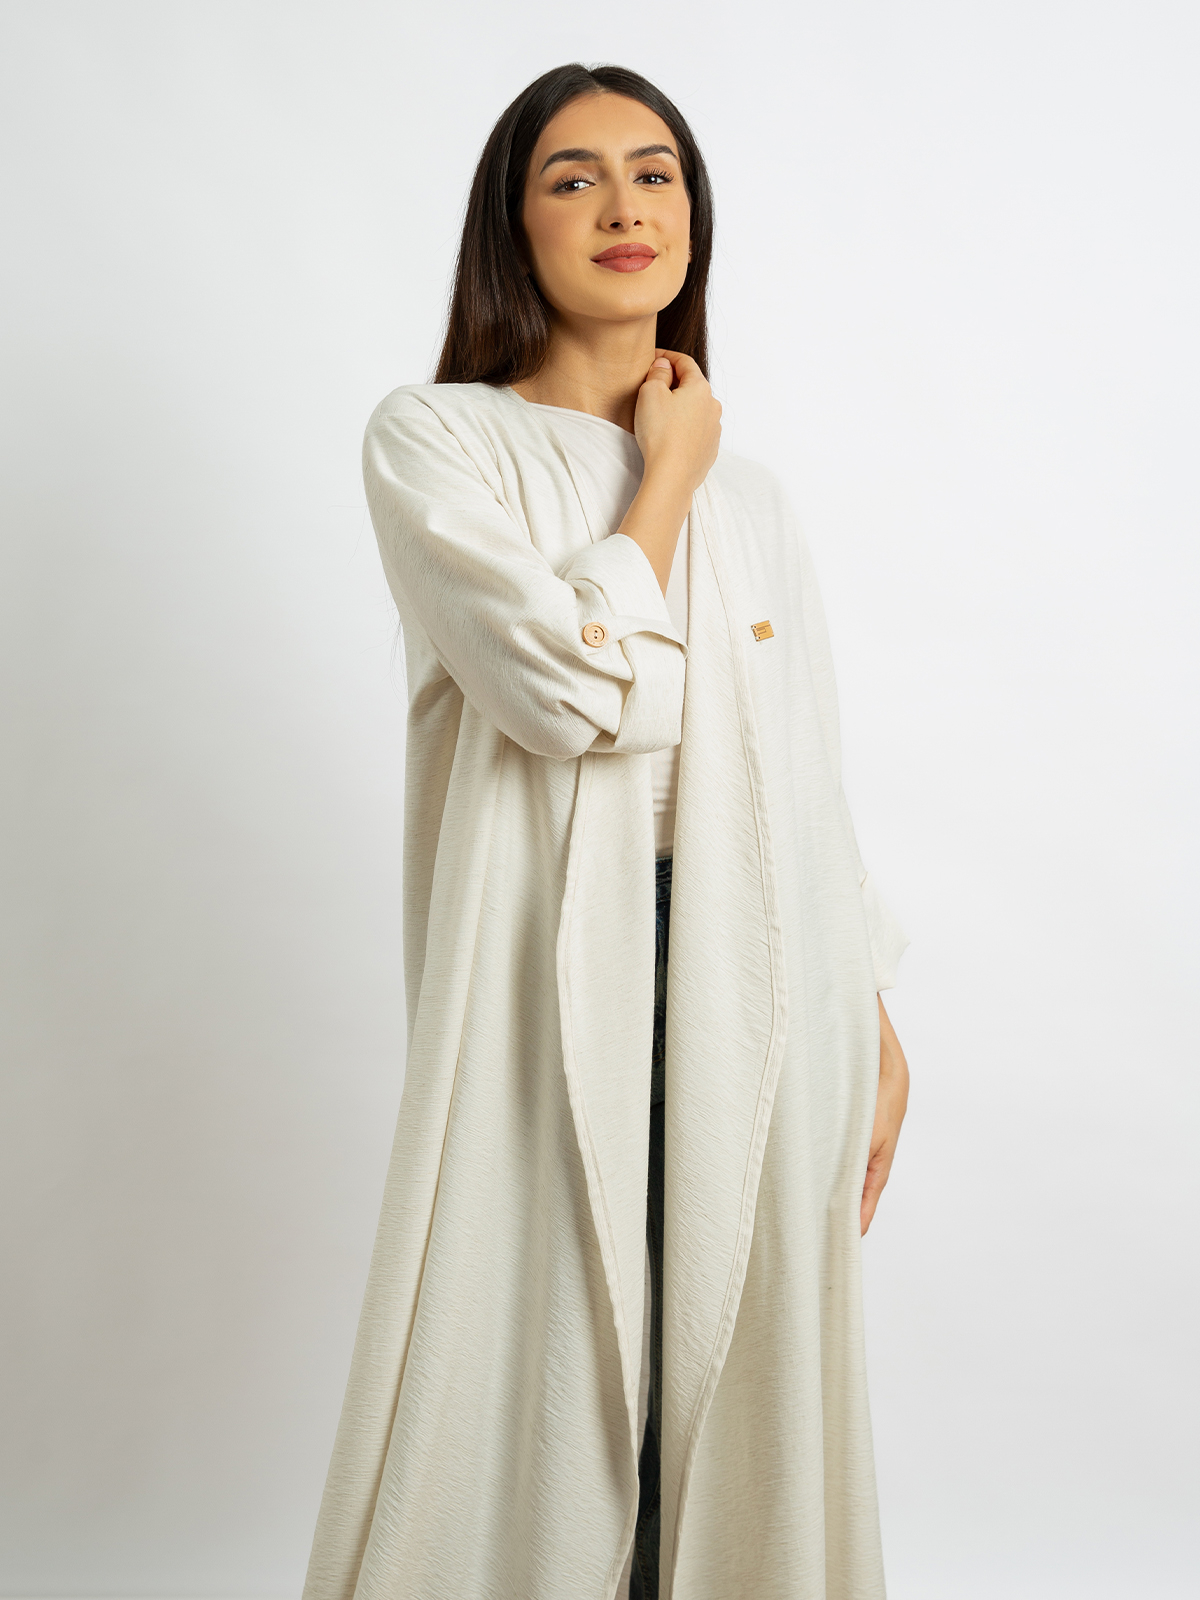 Open long wide cut comfy abaya with adjustable sleeves off white color in linen-feel fabric for work and events by kaafmeem